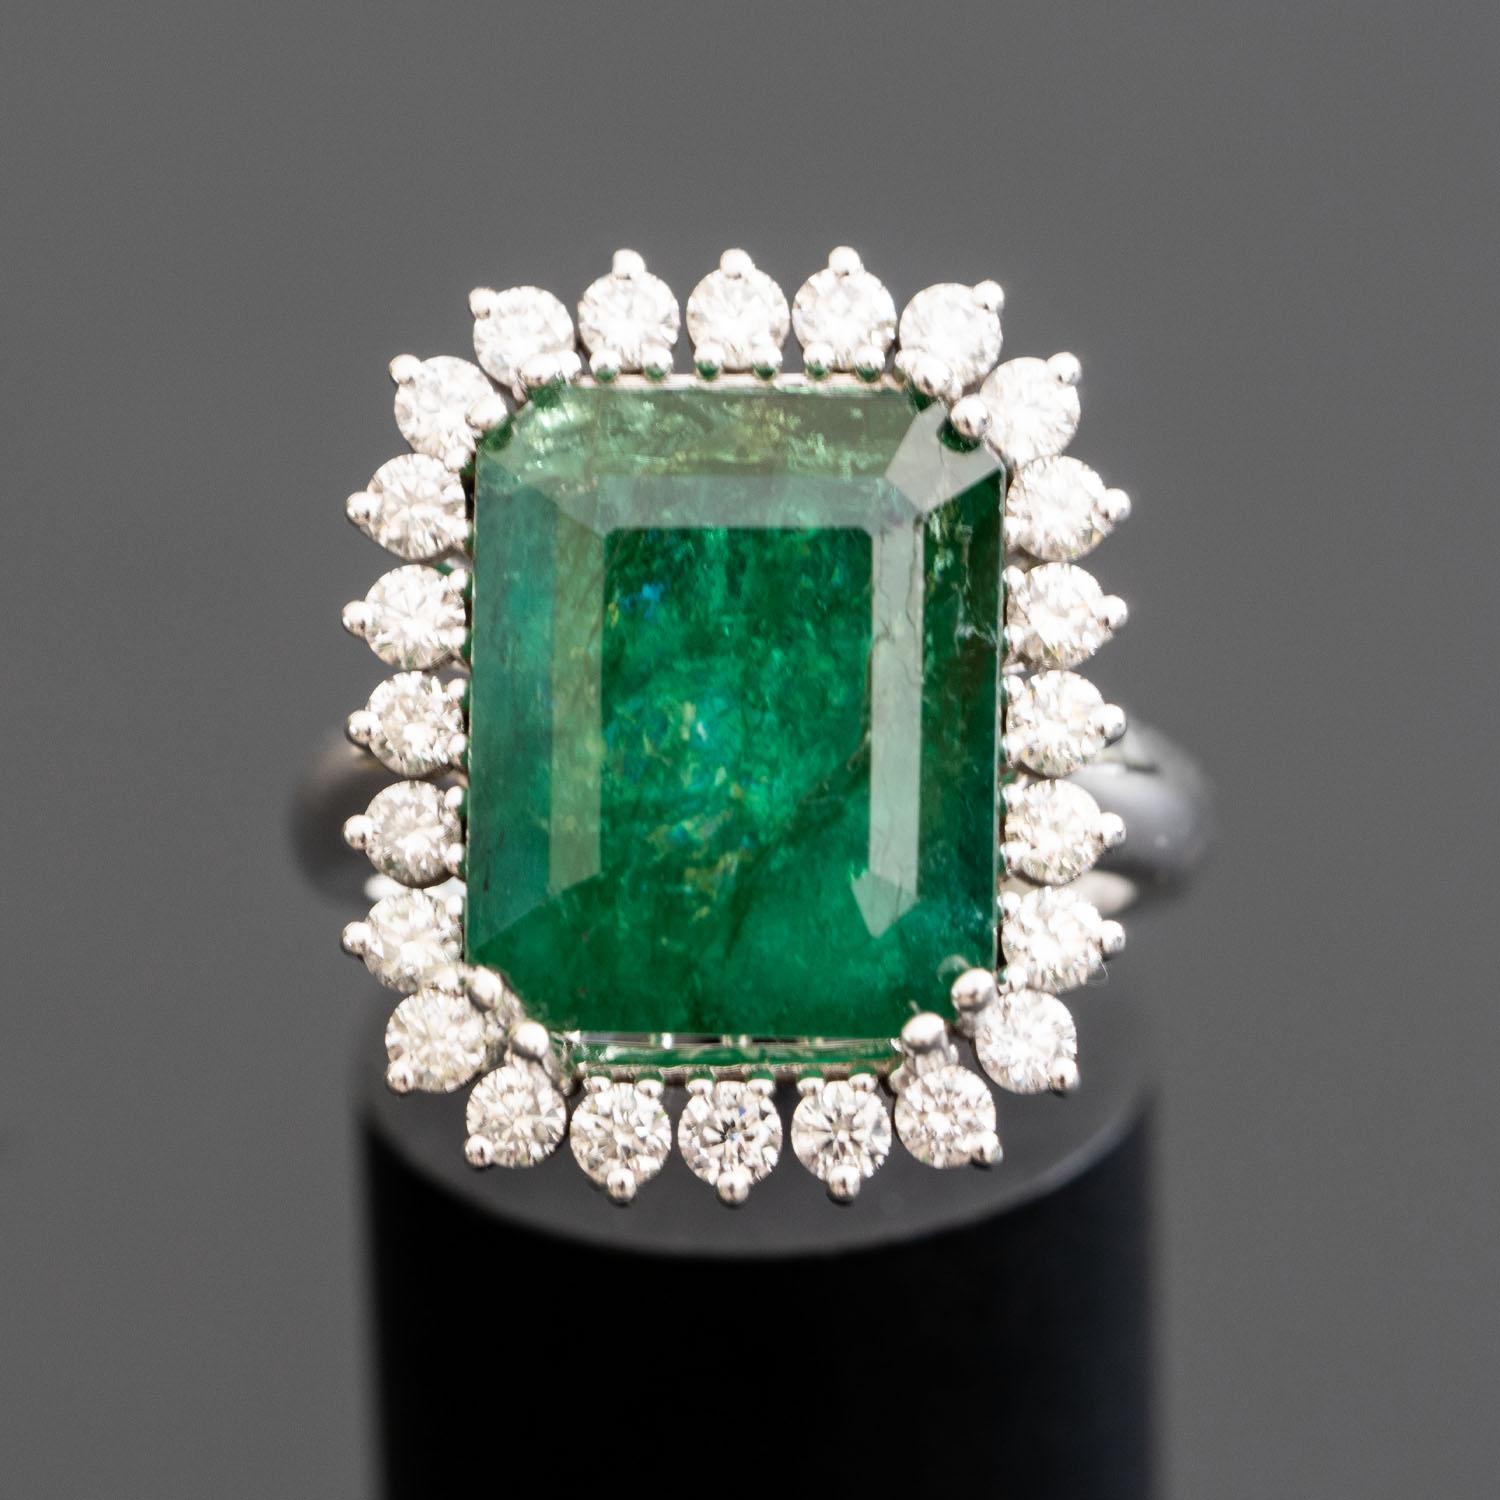 This large natural emerald diamond ring brings a lush touch of color to your fine jewelry collection. The generously-sized 13mm X 11mm central gemstone features the compelling green tones of natural emerald. The center gemstone is surrounded by 1.24